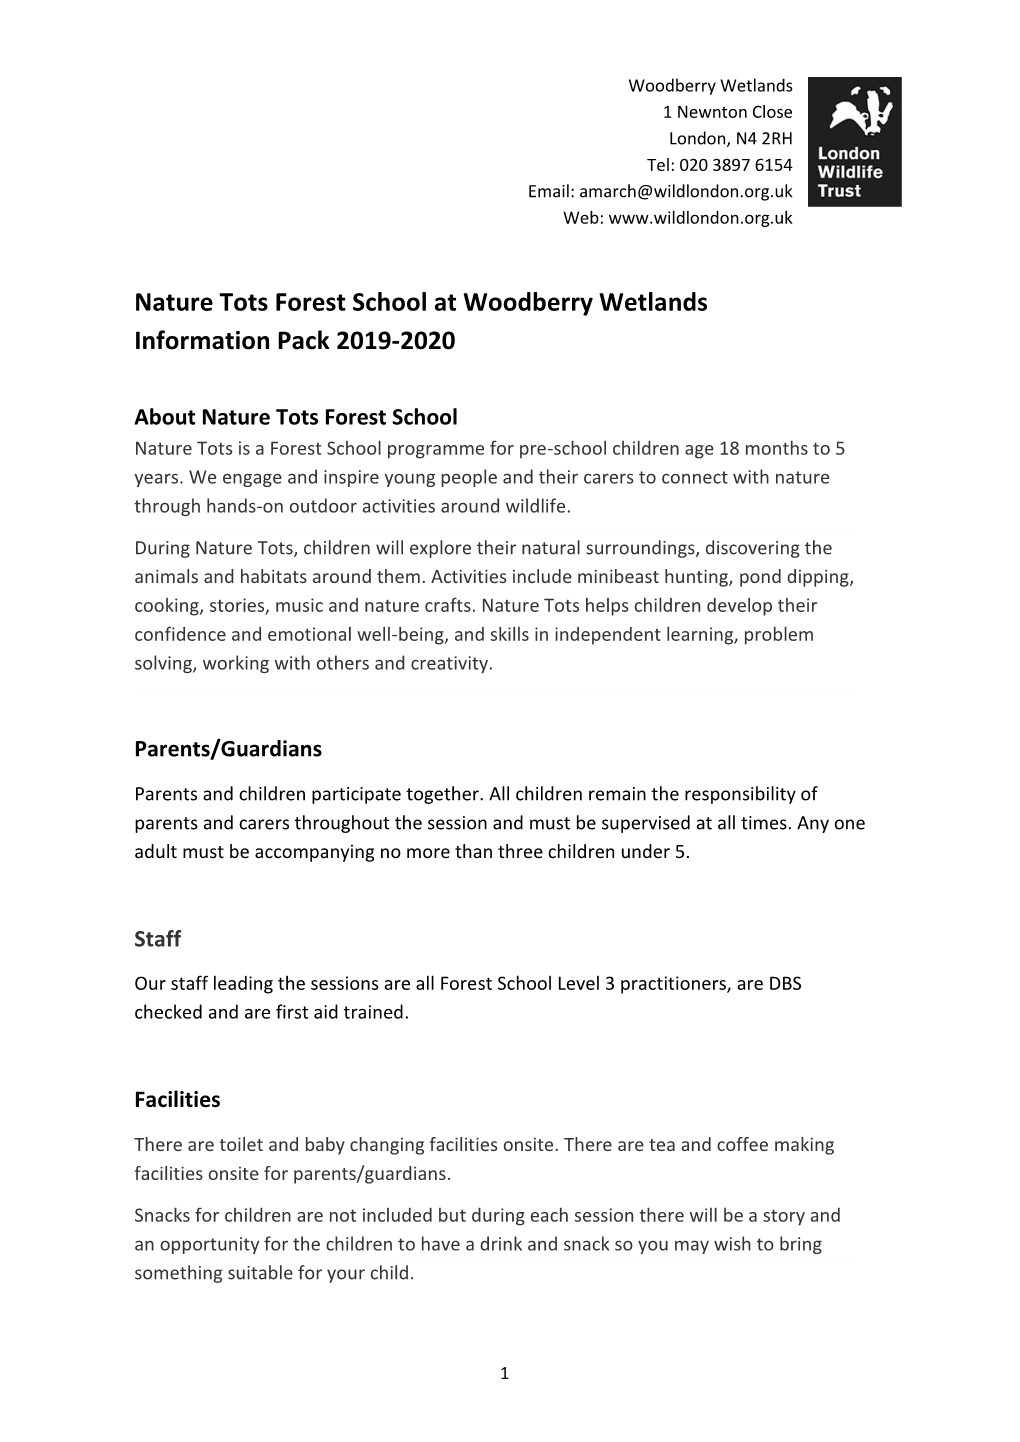 Nature Tots Forest School at Woodberry Wetlands Information Pack 2019-2020